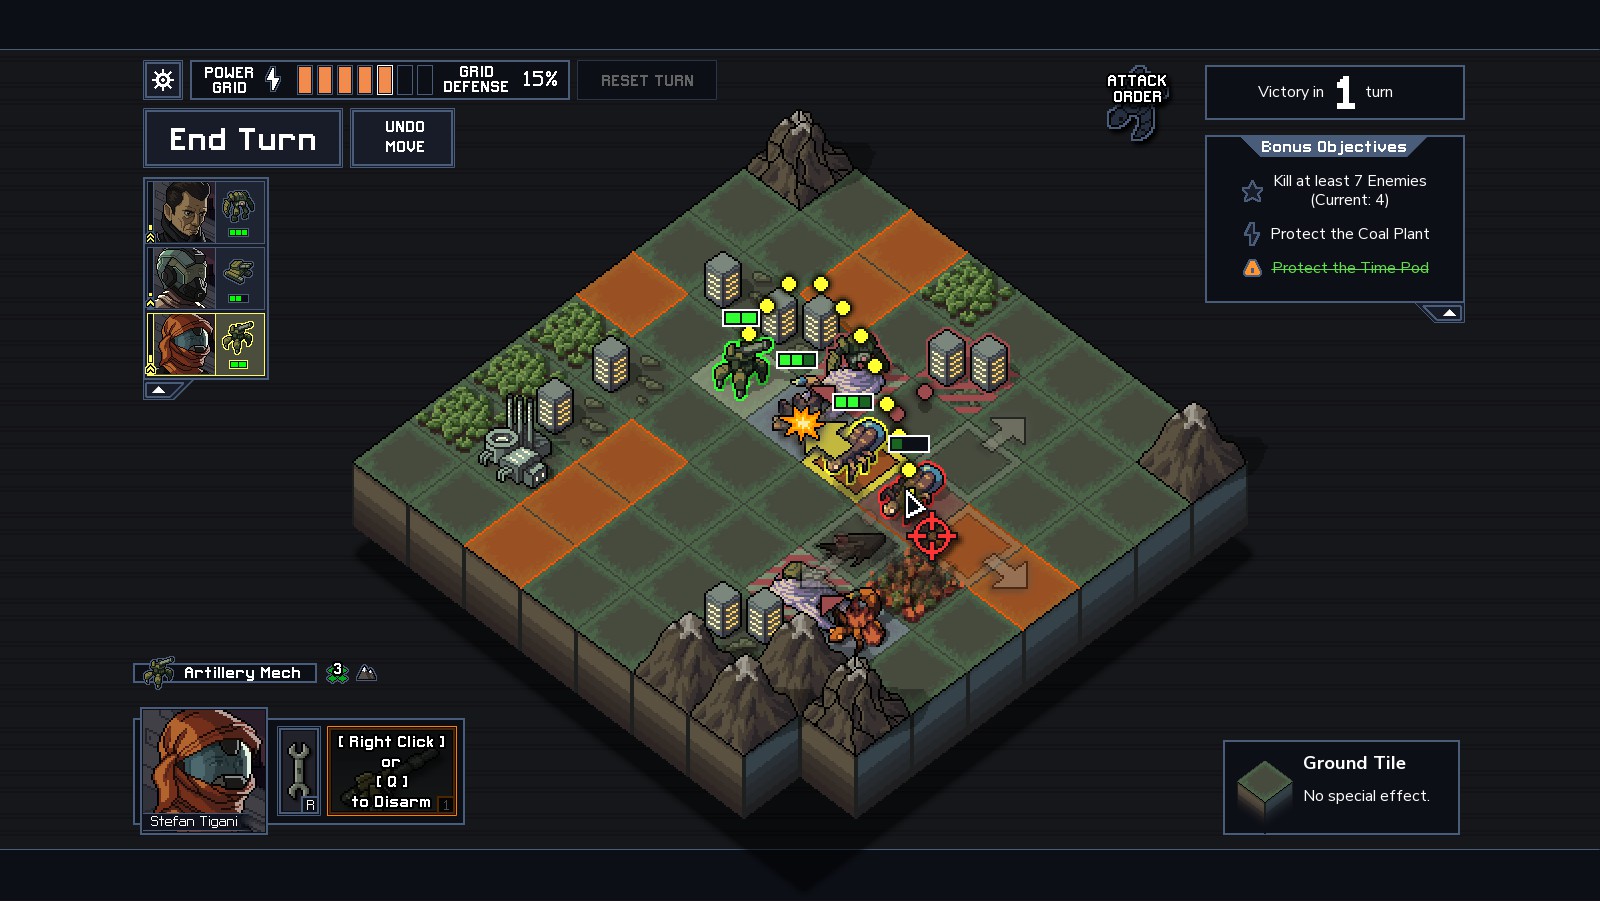 Players fight for supremacy based on strategy and tactics in Into the Breach